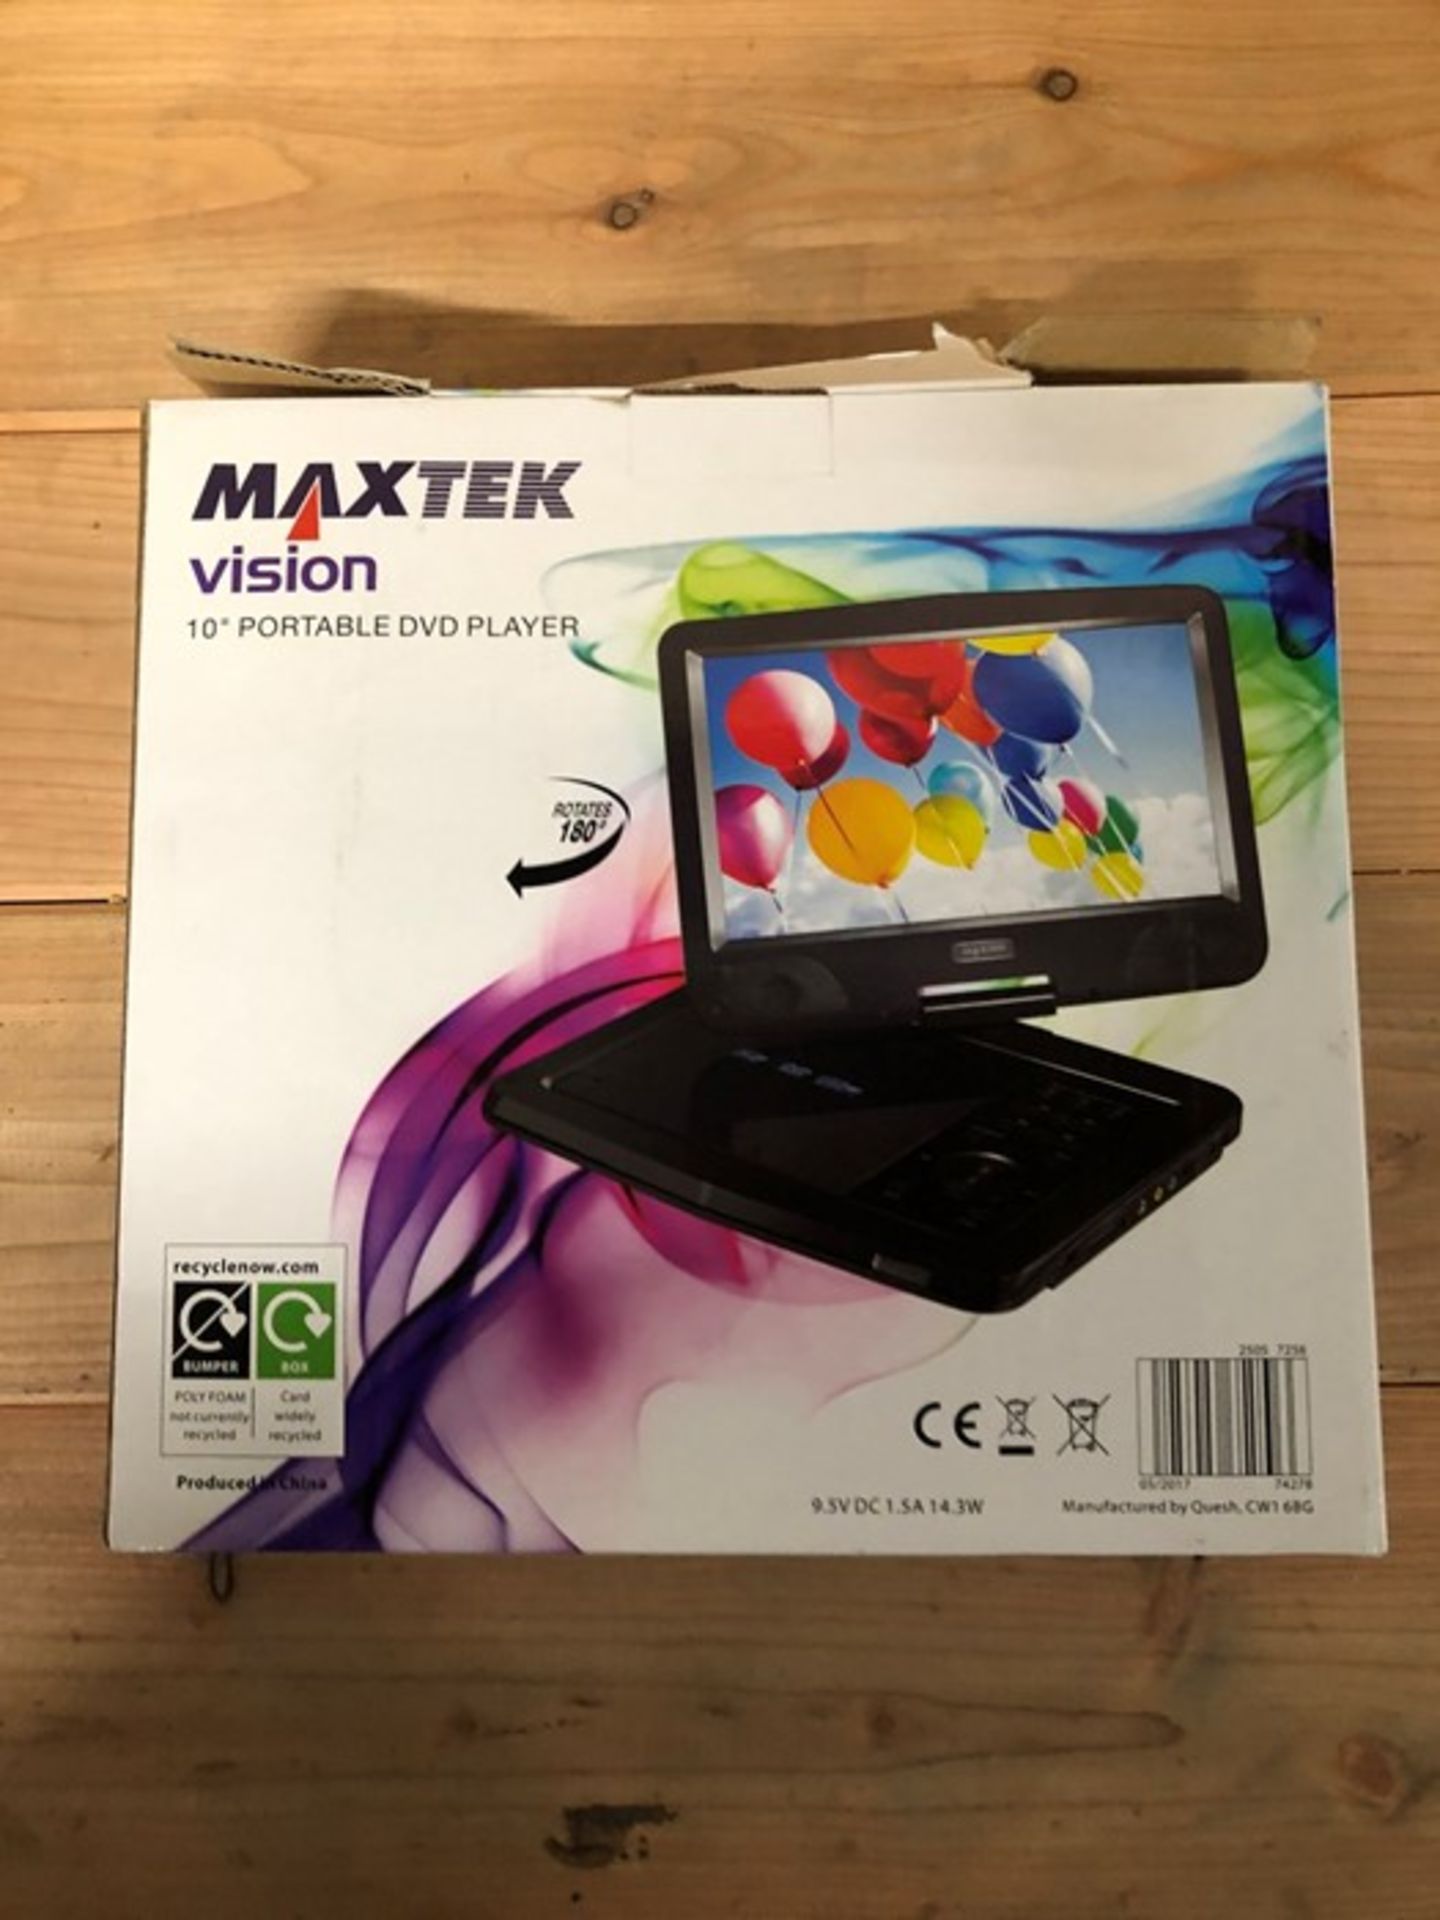 1 BOXED MAXTEK VISION 10" PORTABLE DVD PLAYER / RRP £29.99 (PUBLIC VIEWING AVAILABLE)